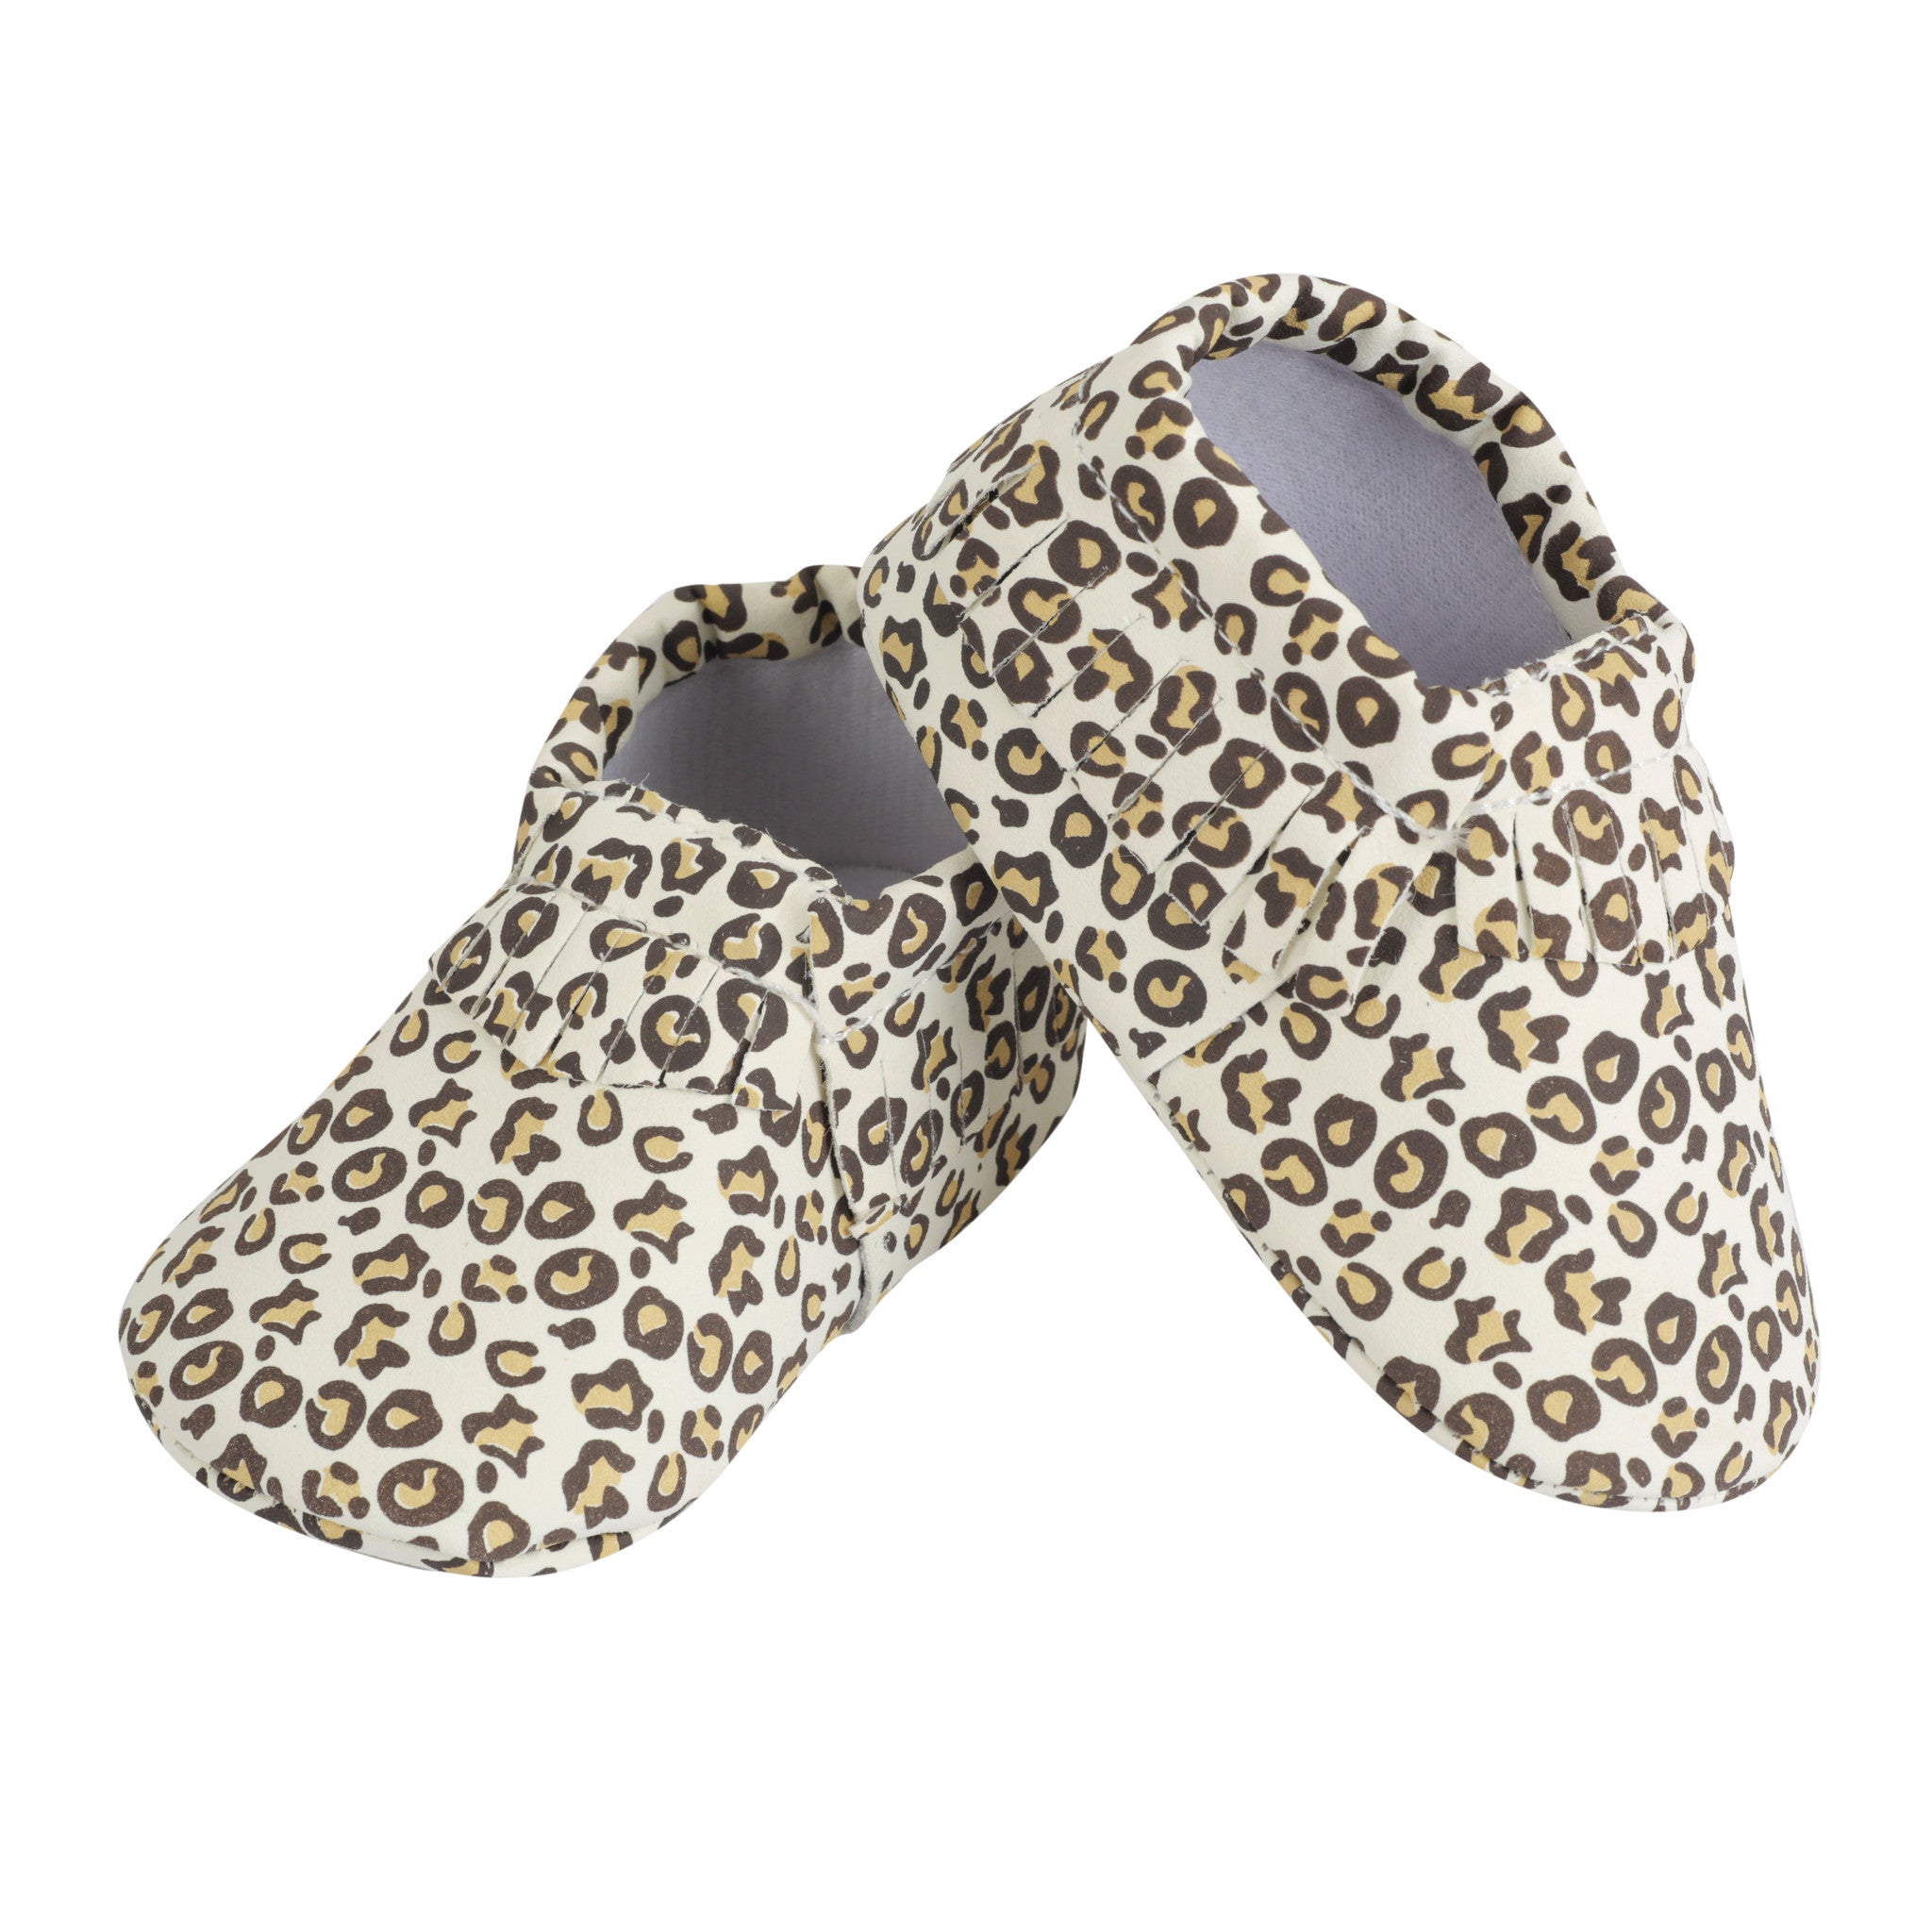 baby leopard moccasins